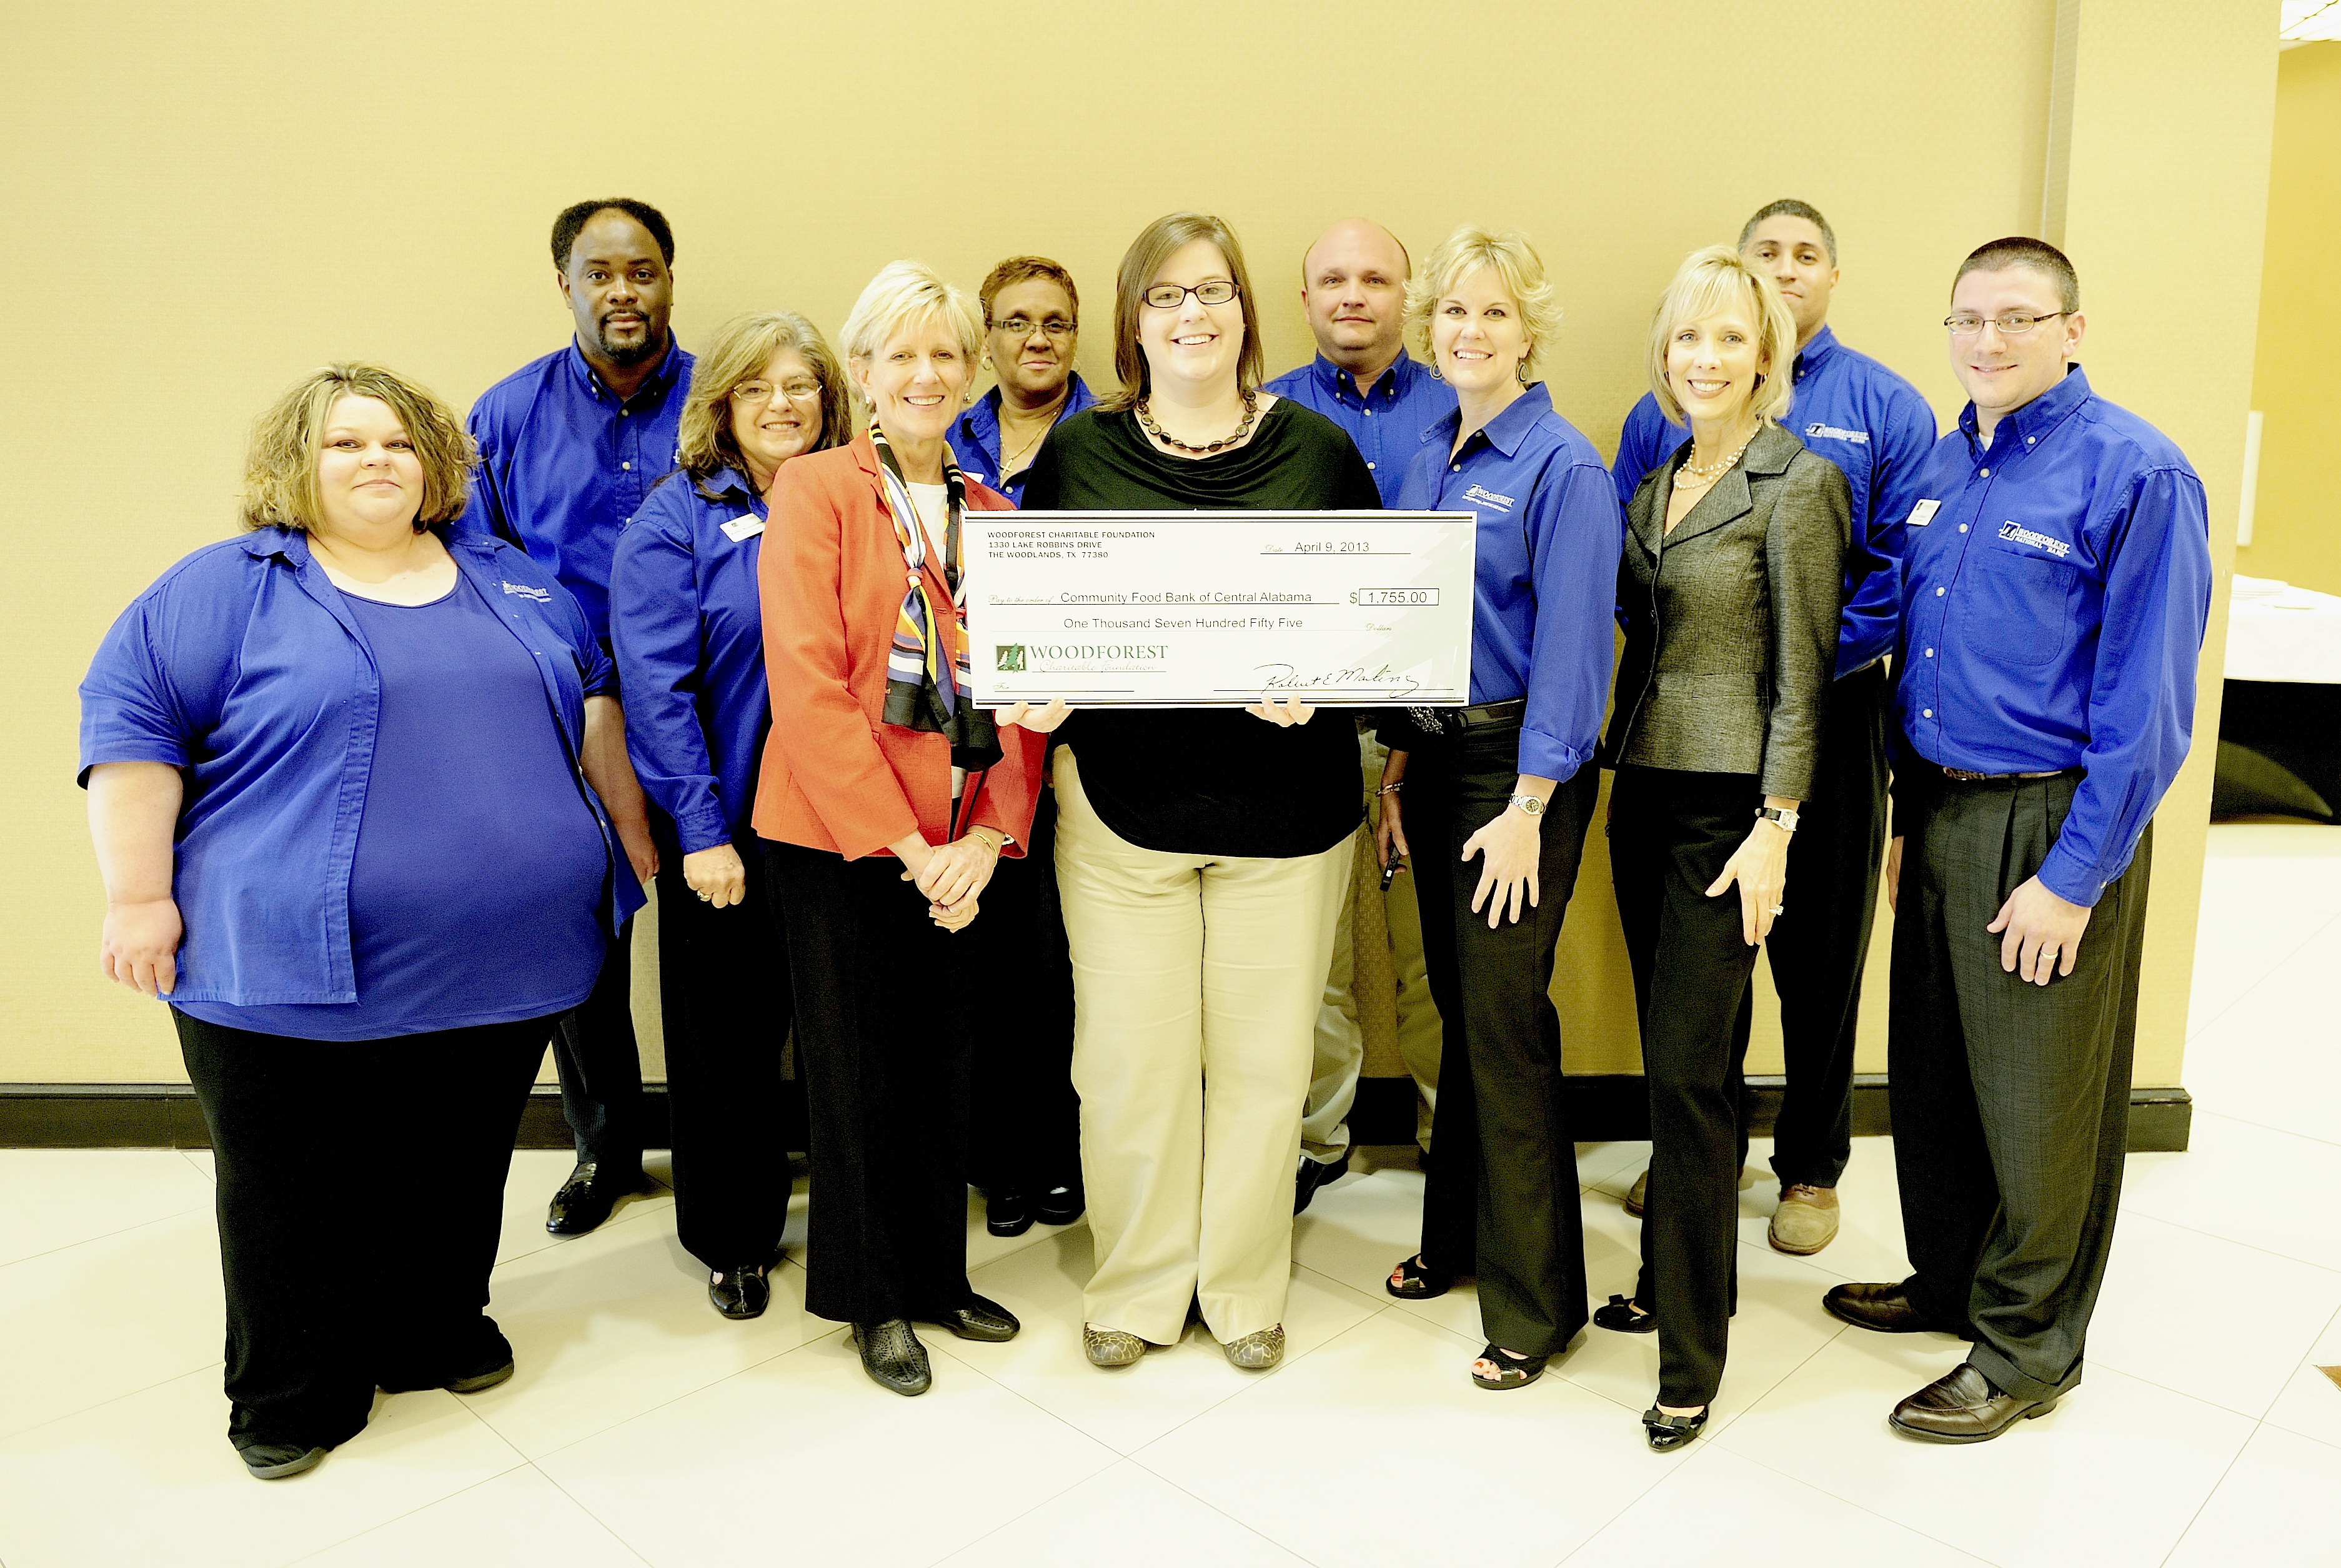 Community Food Bank of Central Alabama receives $1,755 donation from WCF.